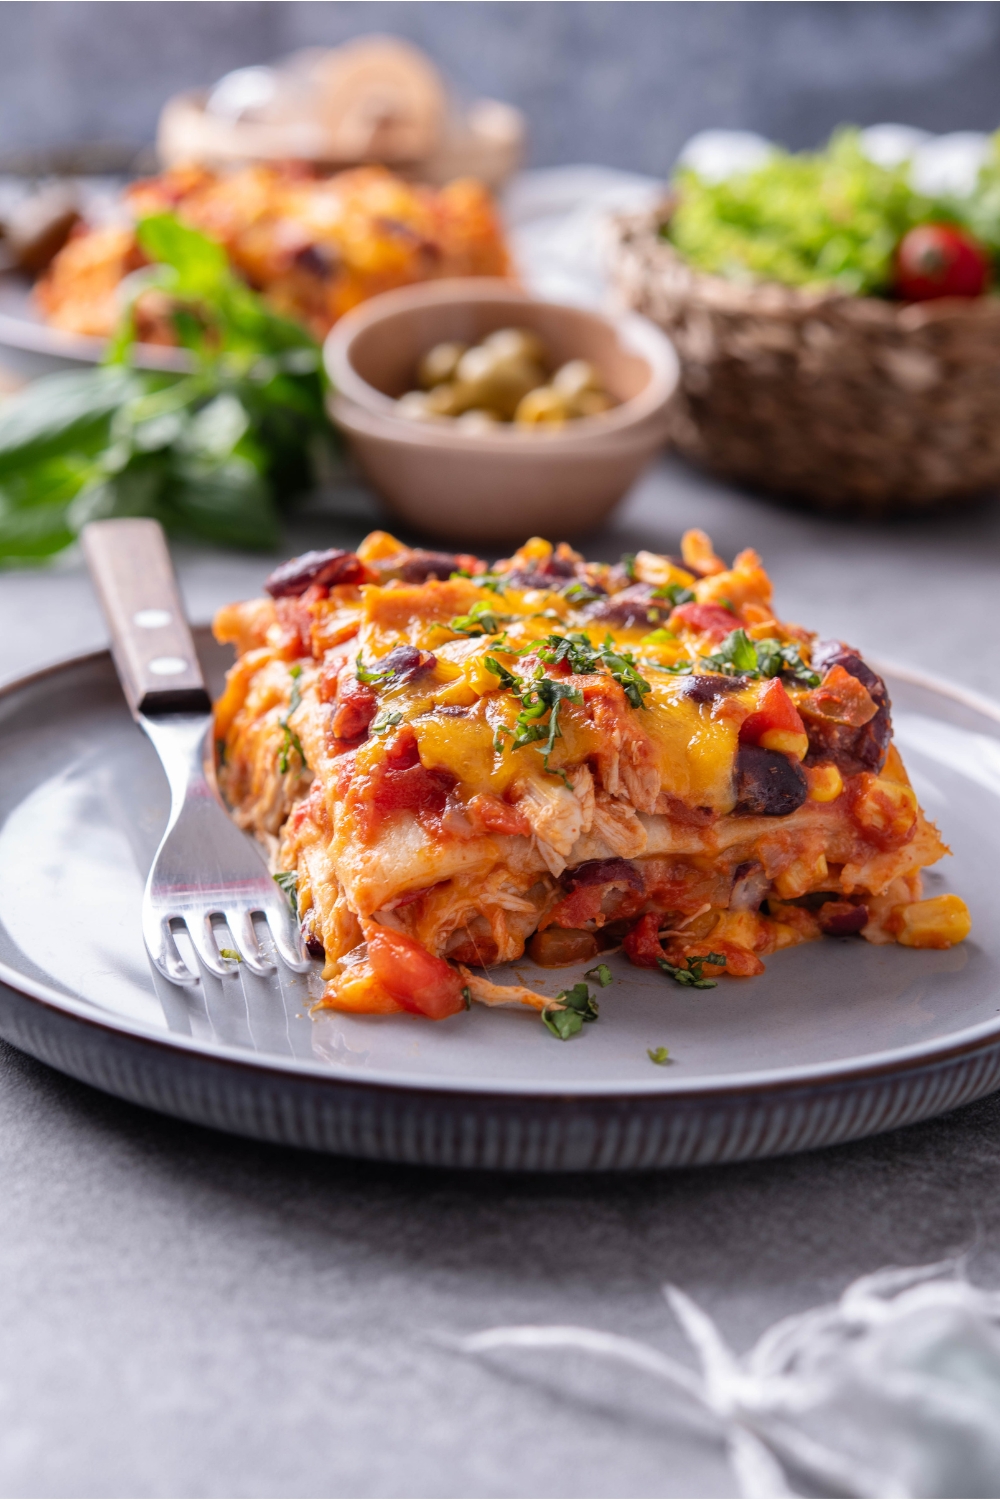 A square serving of chicken tortilla casserole layered with tomato sauce, shredded chicken, black beans, and topped with melted cheese, and fresh green herbs.